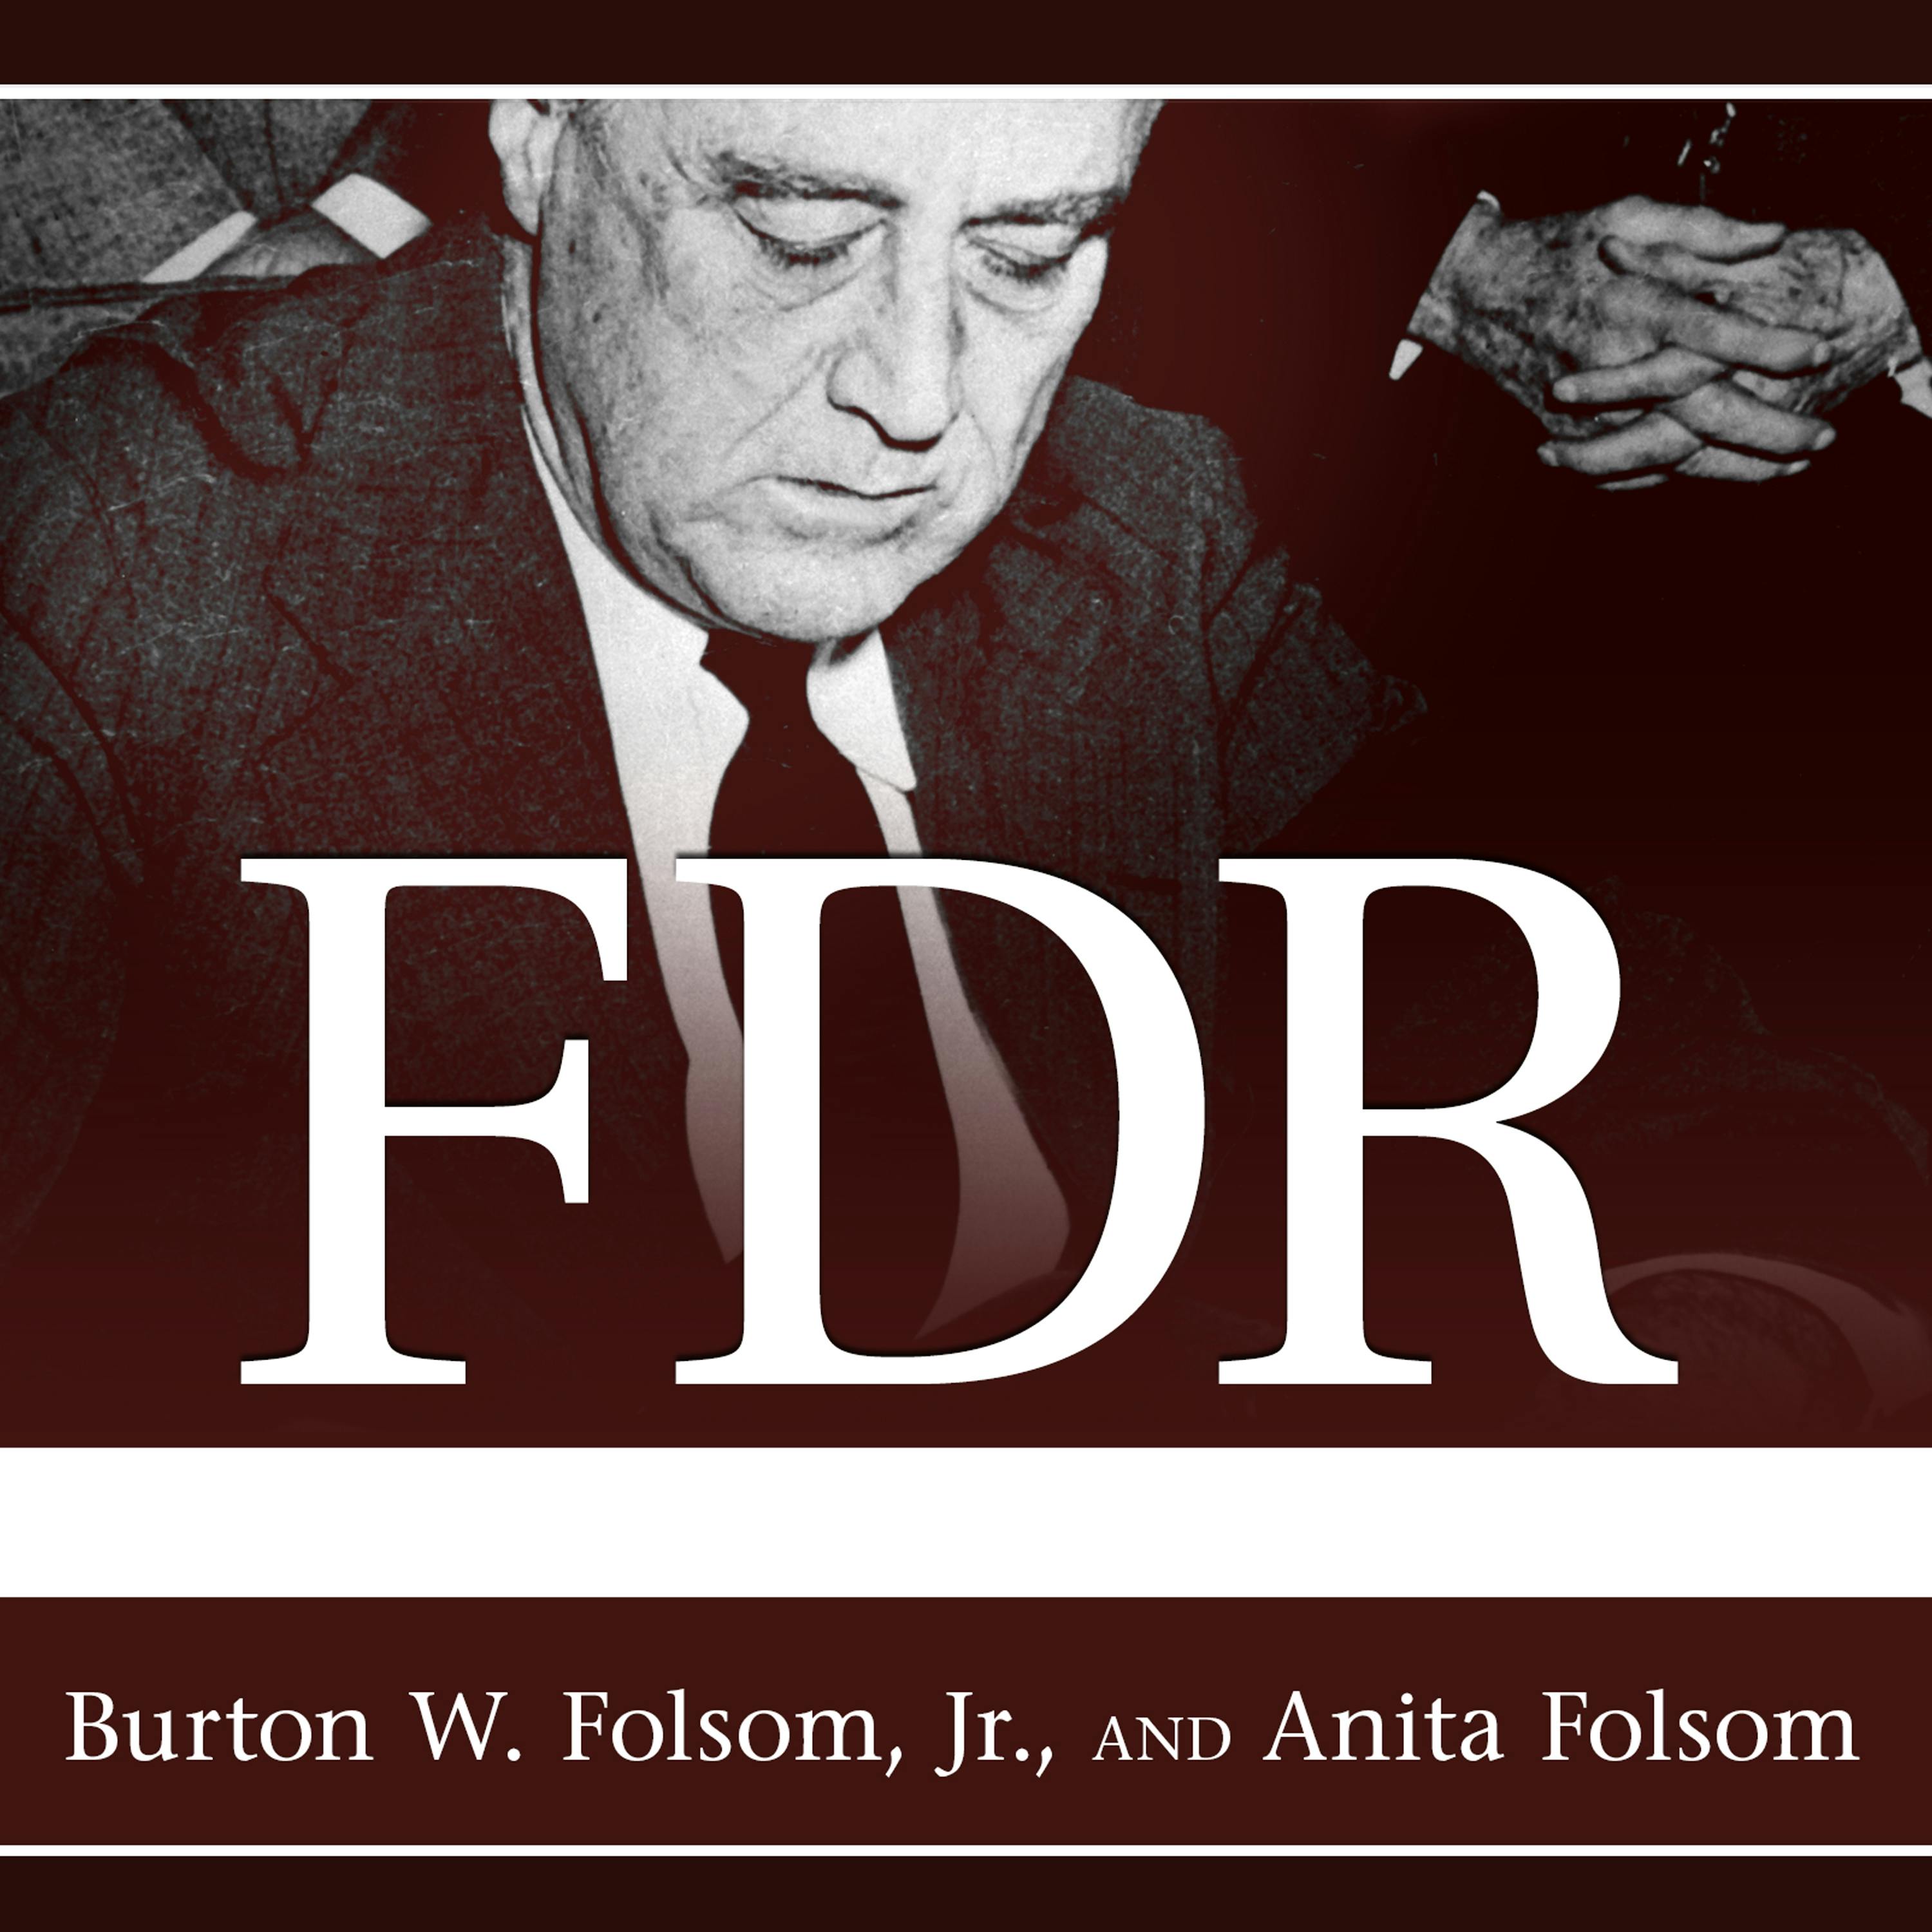 FDR Goes to War: How Expanded Executive Power, Spiraling National Debt, and Restricted Civil Liberties Shaped Wartime America - Jr., Anita Folsom